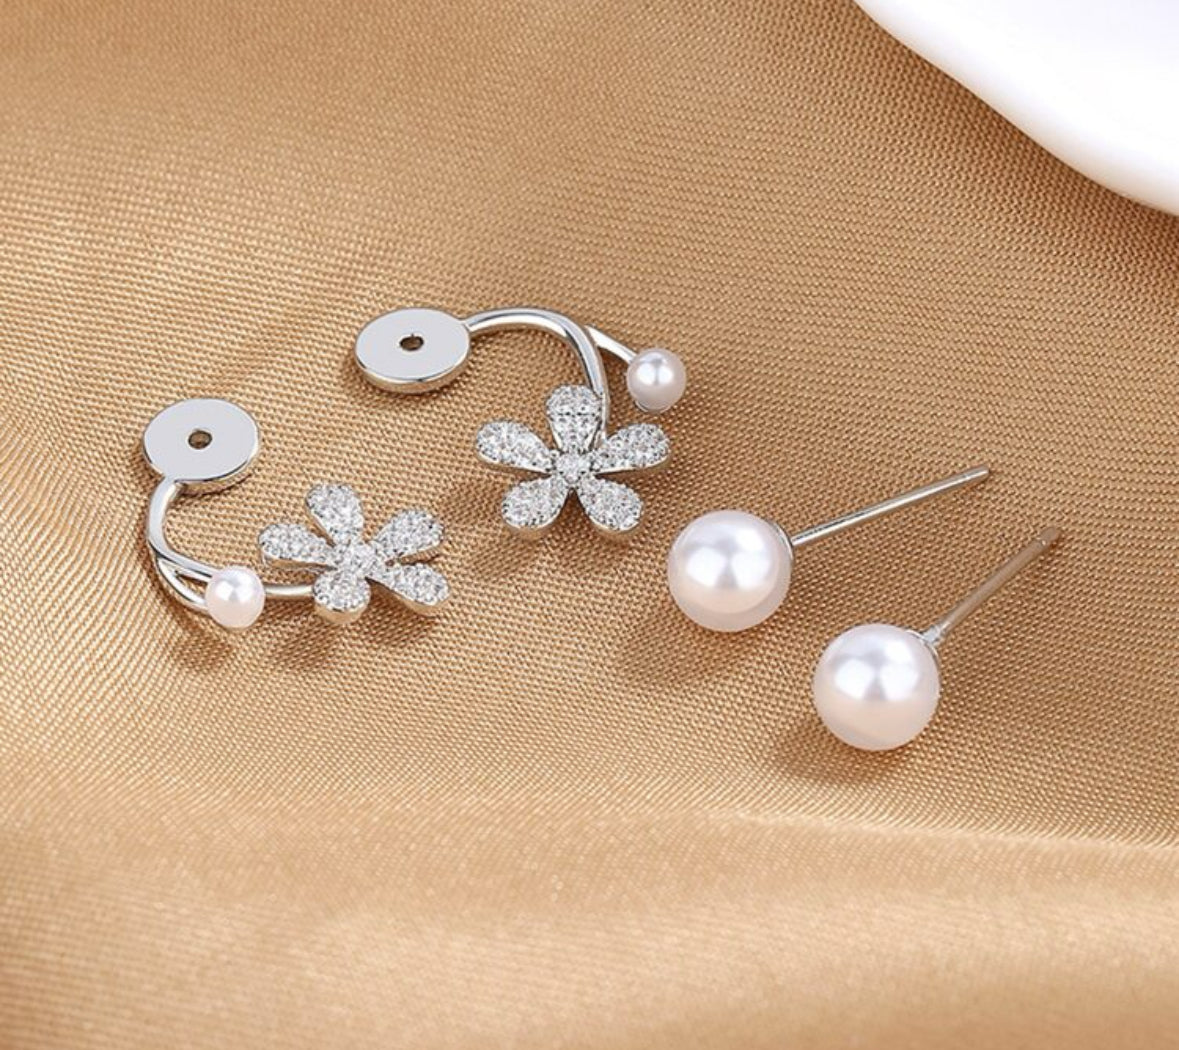 Fashionable Silver-plated Front Back Earrings.